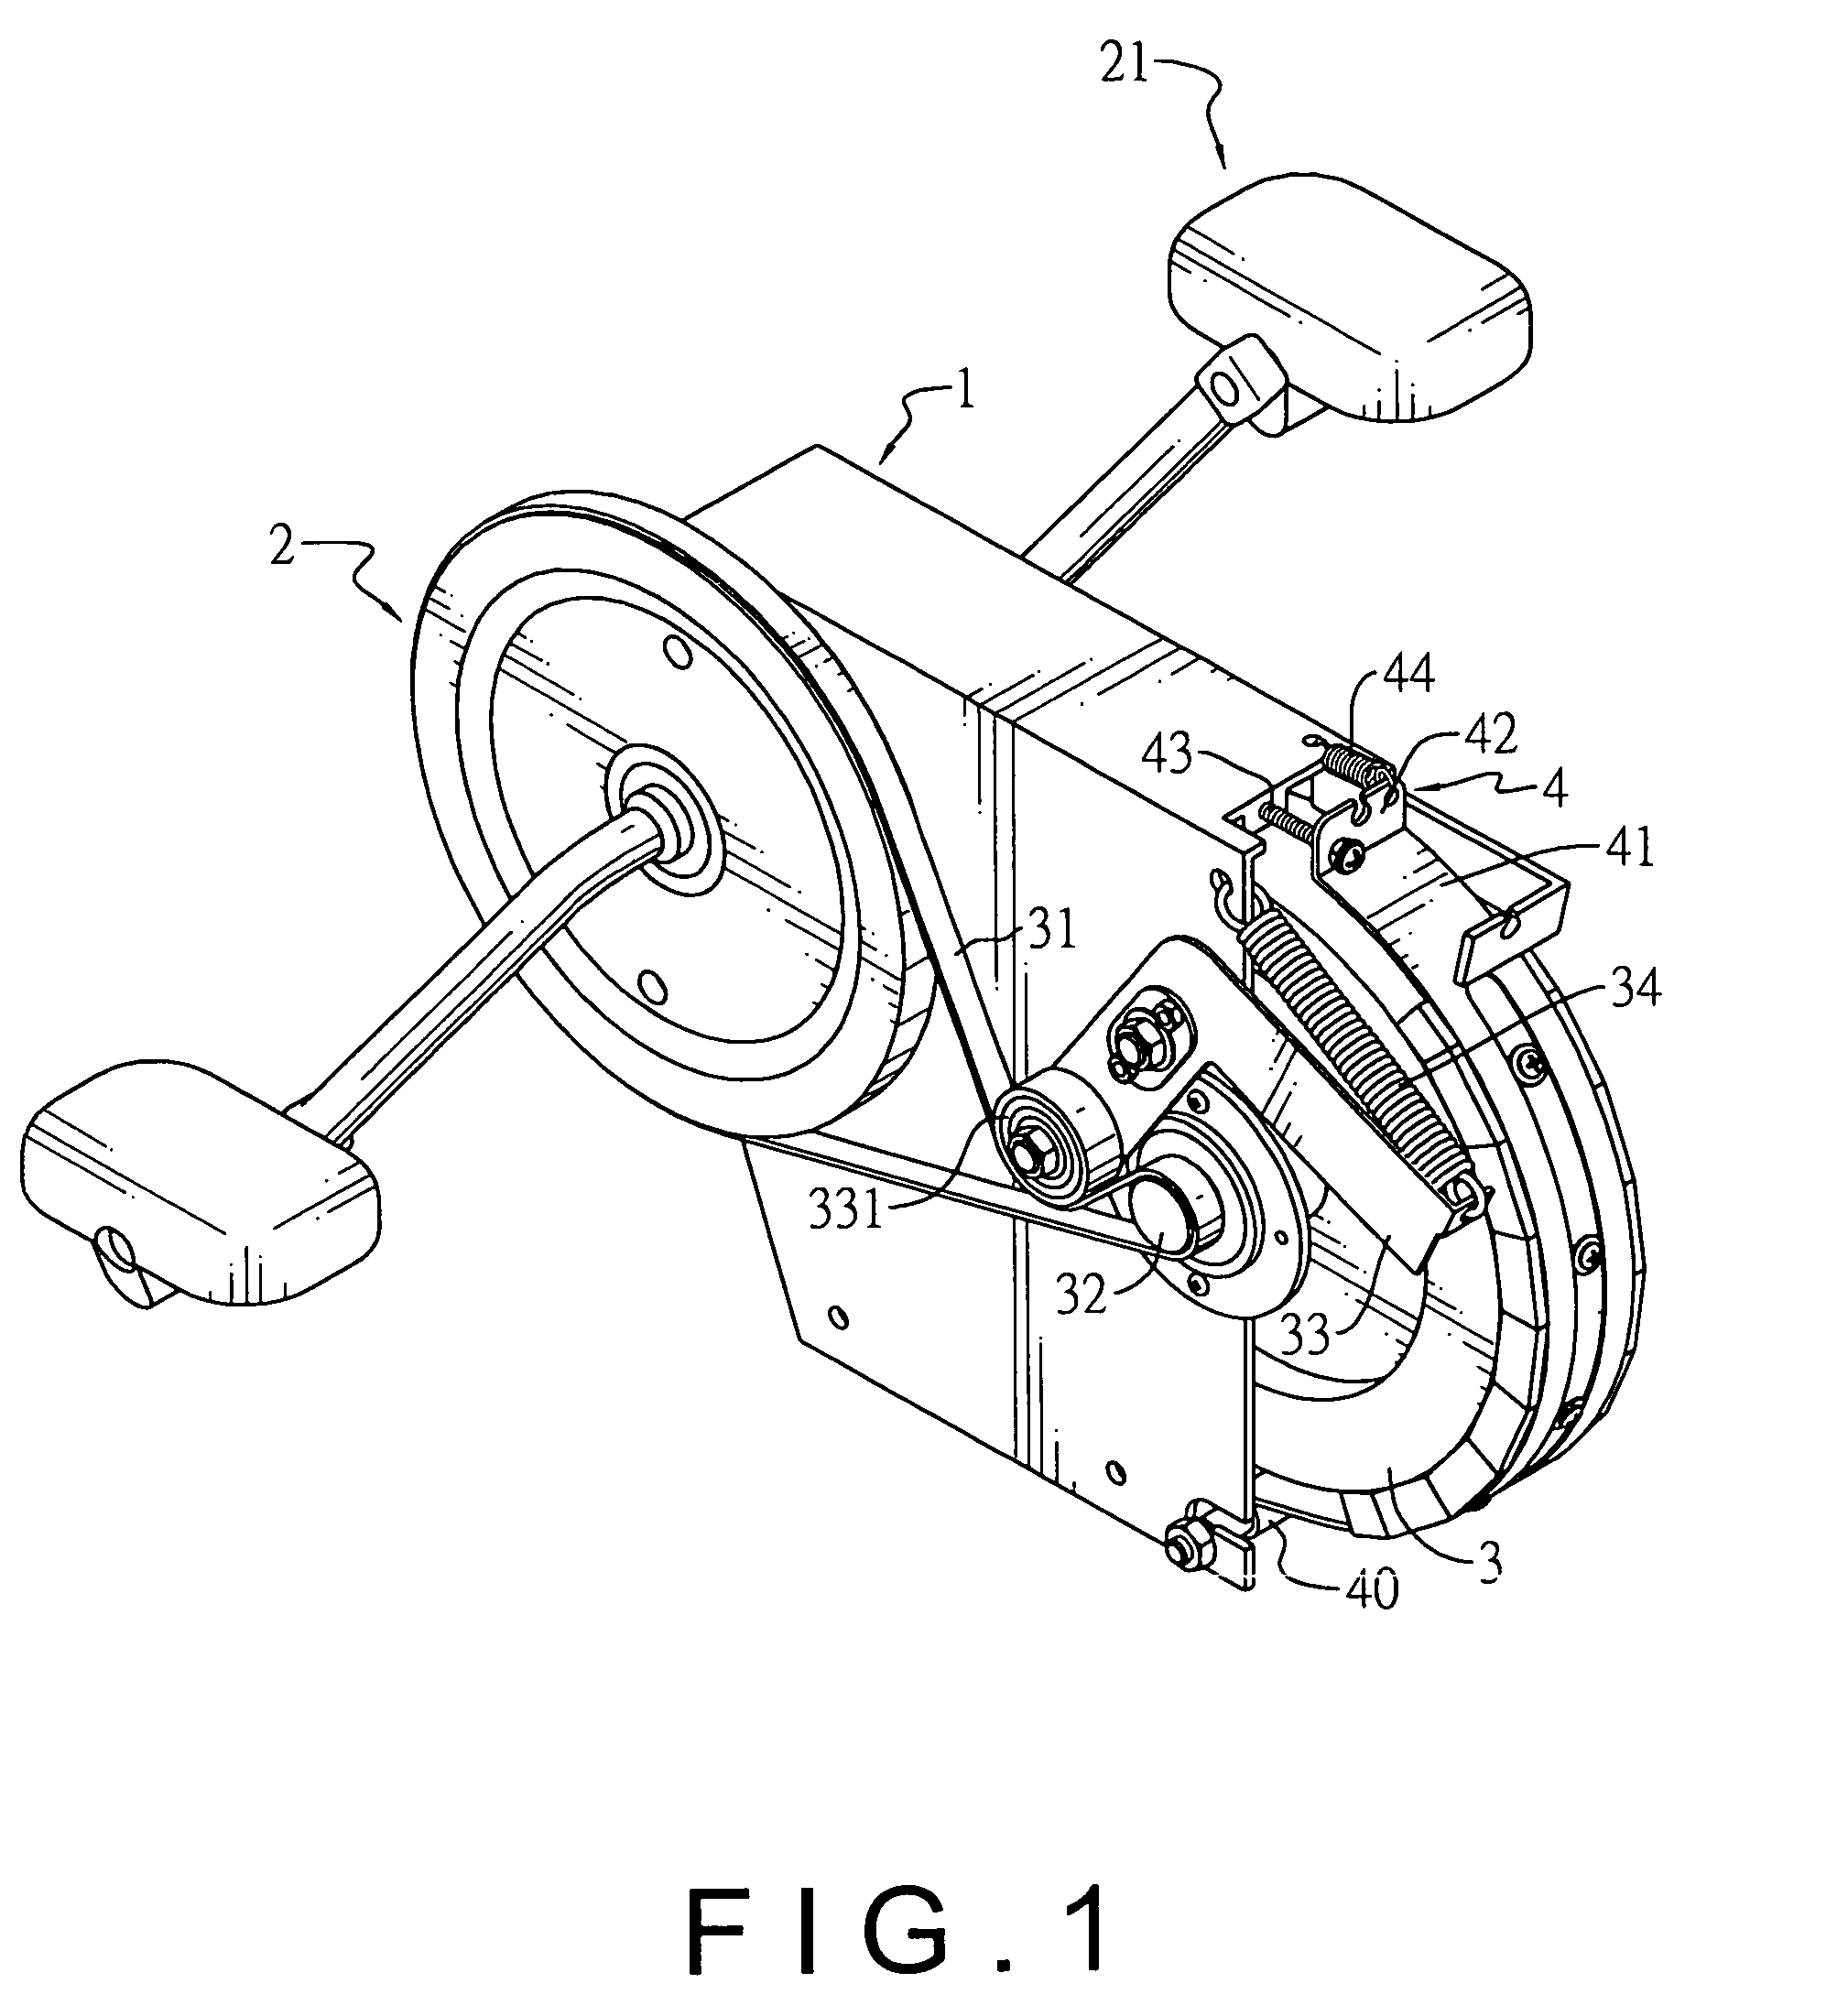 Modulated transmission assembly for an exercise bicycle